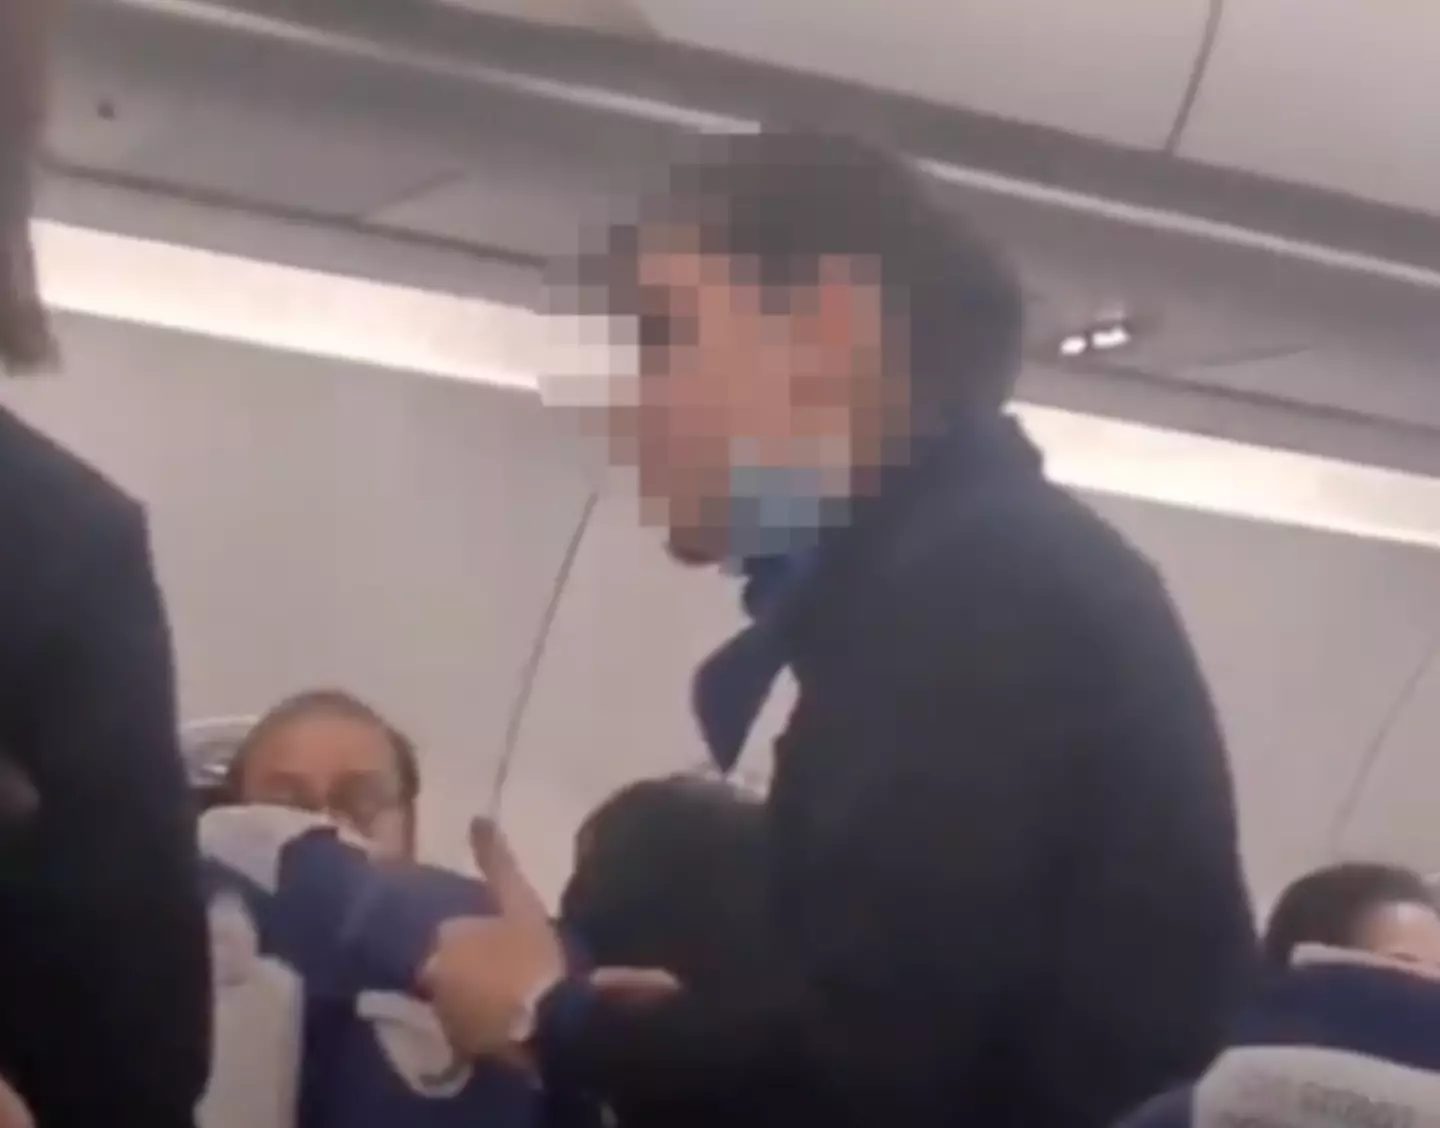 The flight attendant accused the customer of making her co-workers cry.